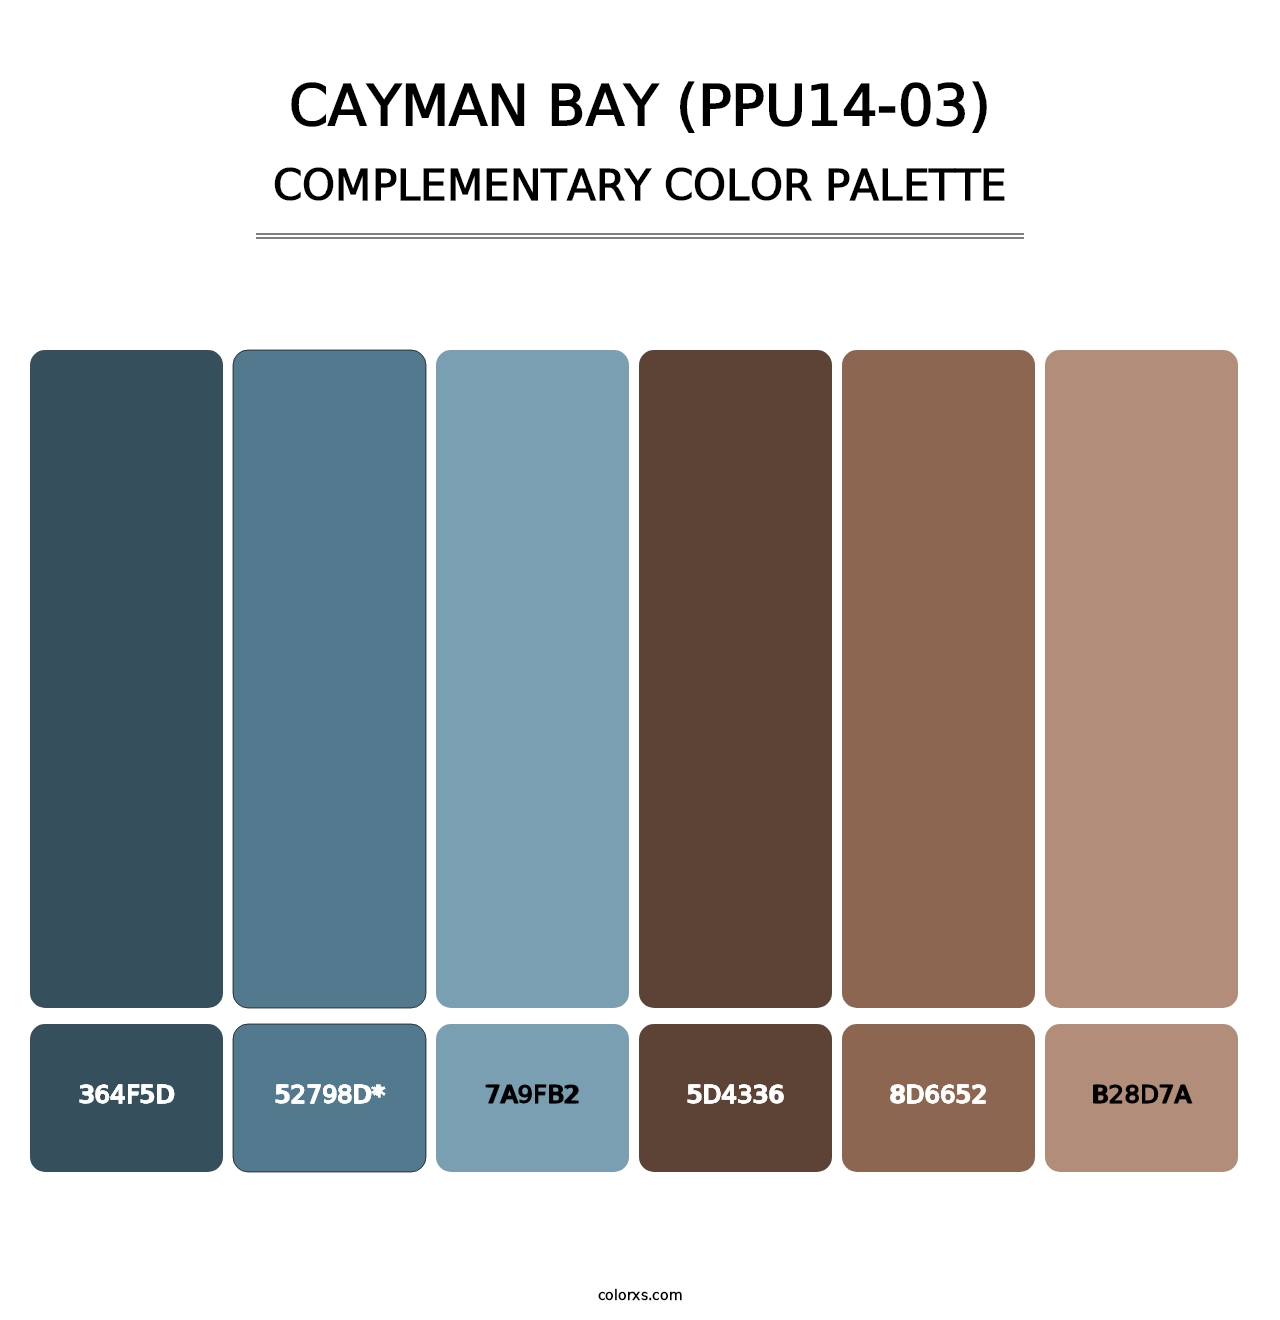 Cayman Bay (PPU14-03) - Complementary Color Palette